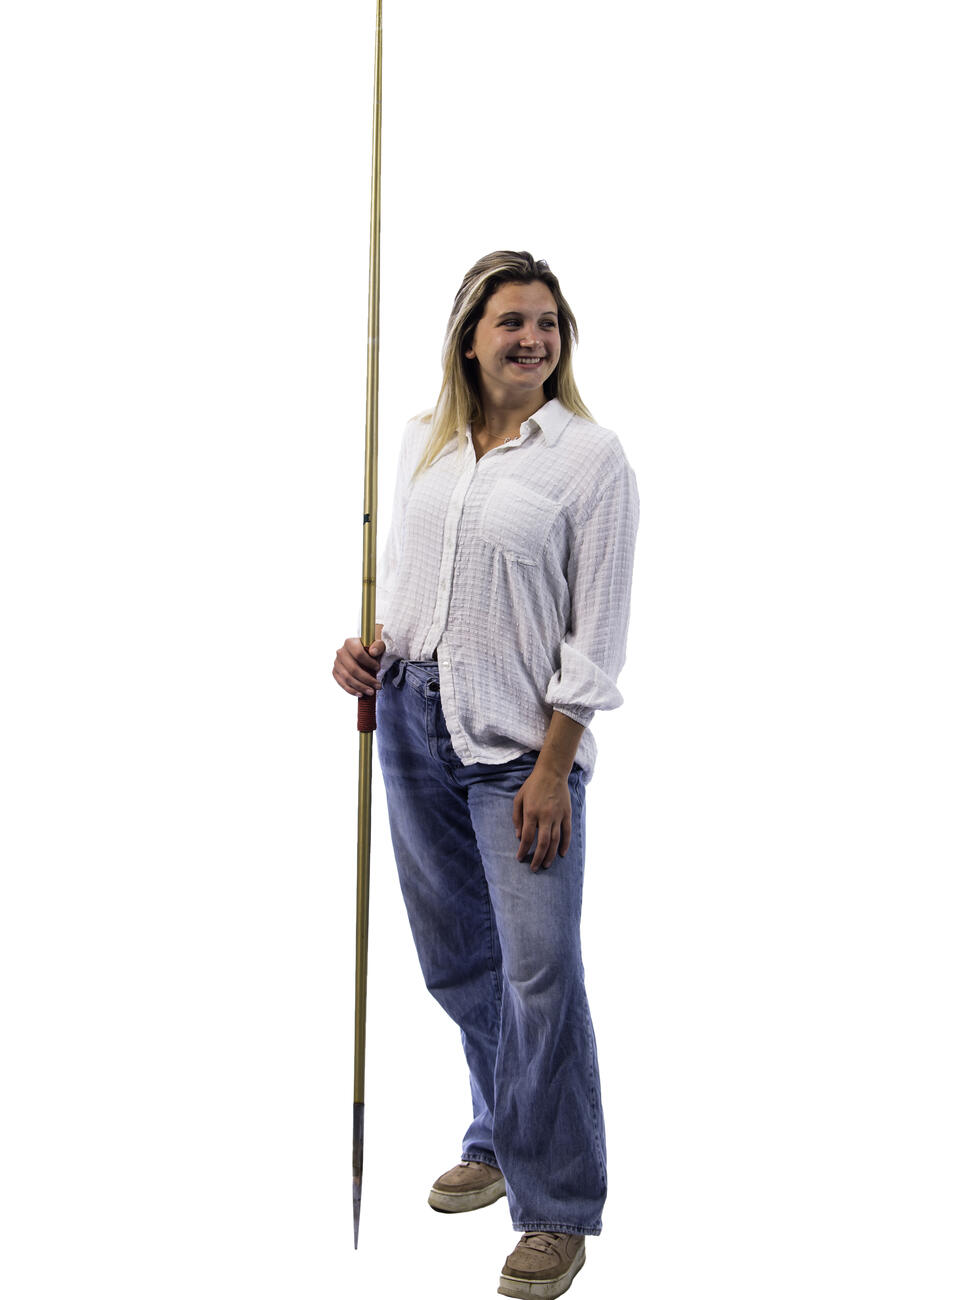 Bethany Rippon poses with a javelin spear.